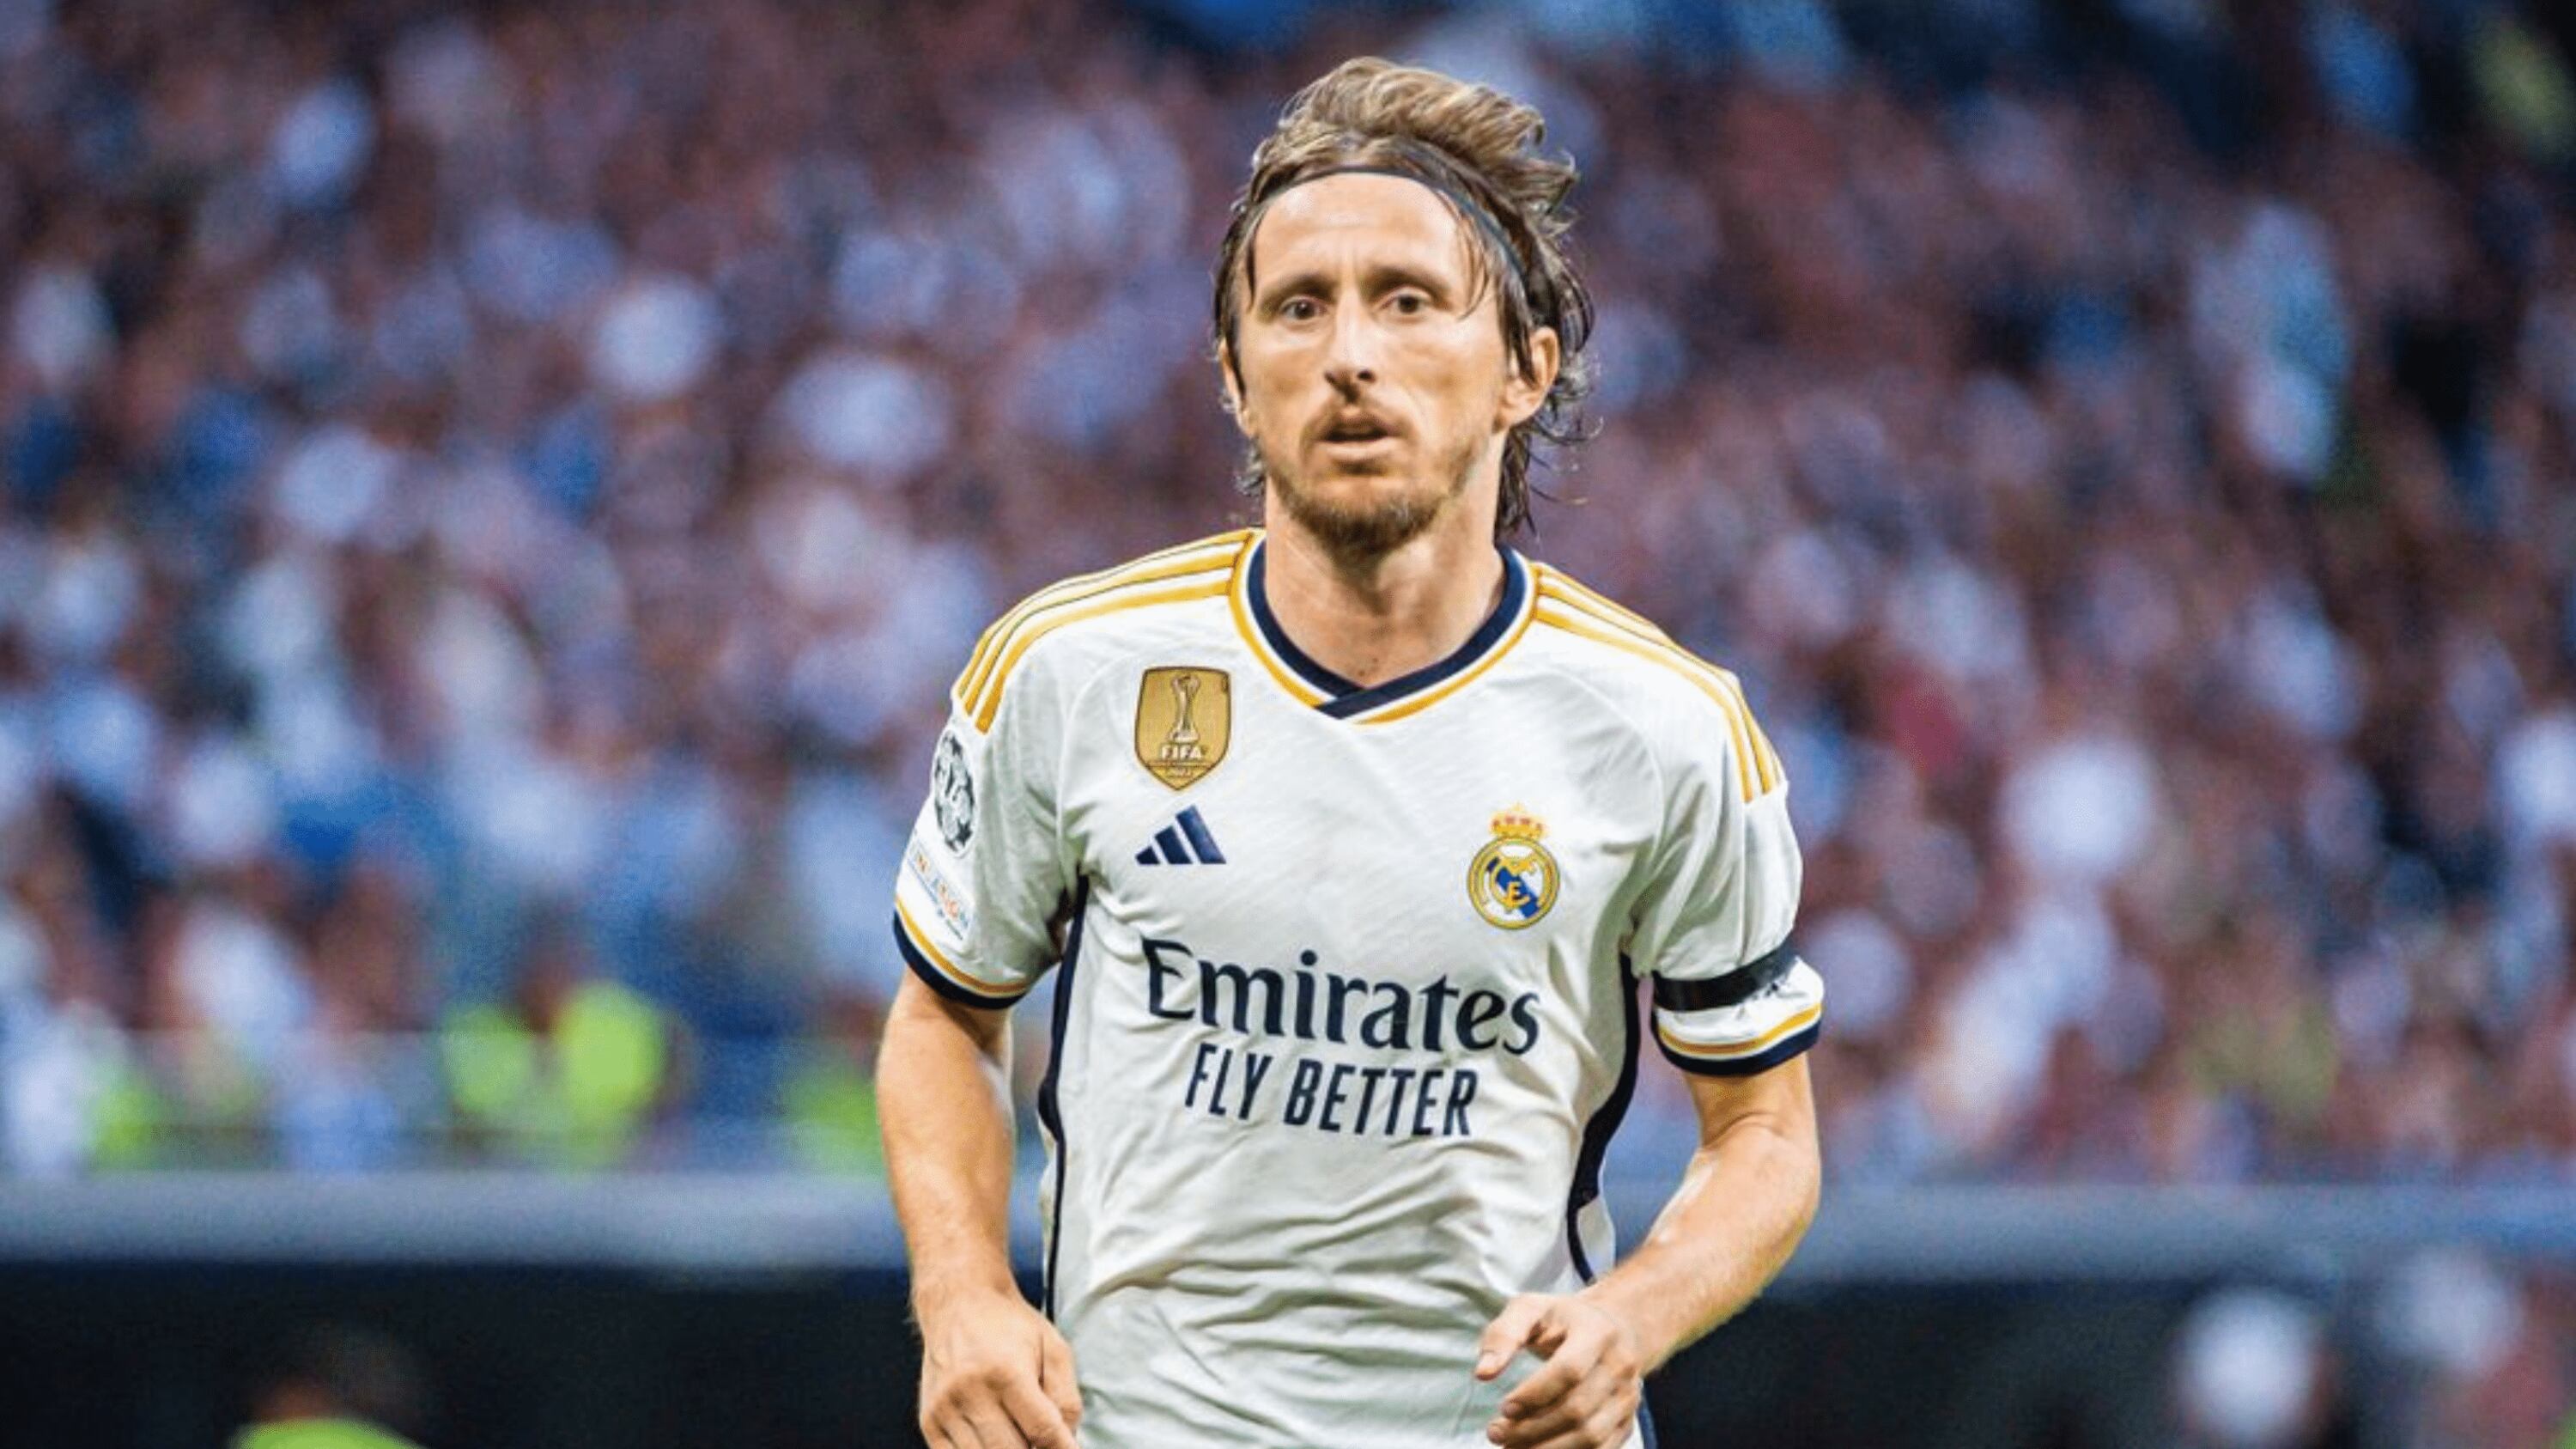 While in Miami they offer him Messi's salary, the millions from Arabia that convince Modric